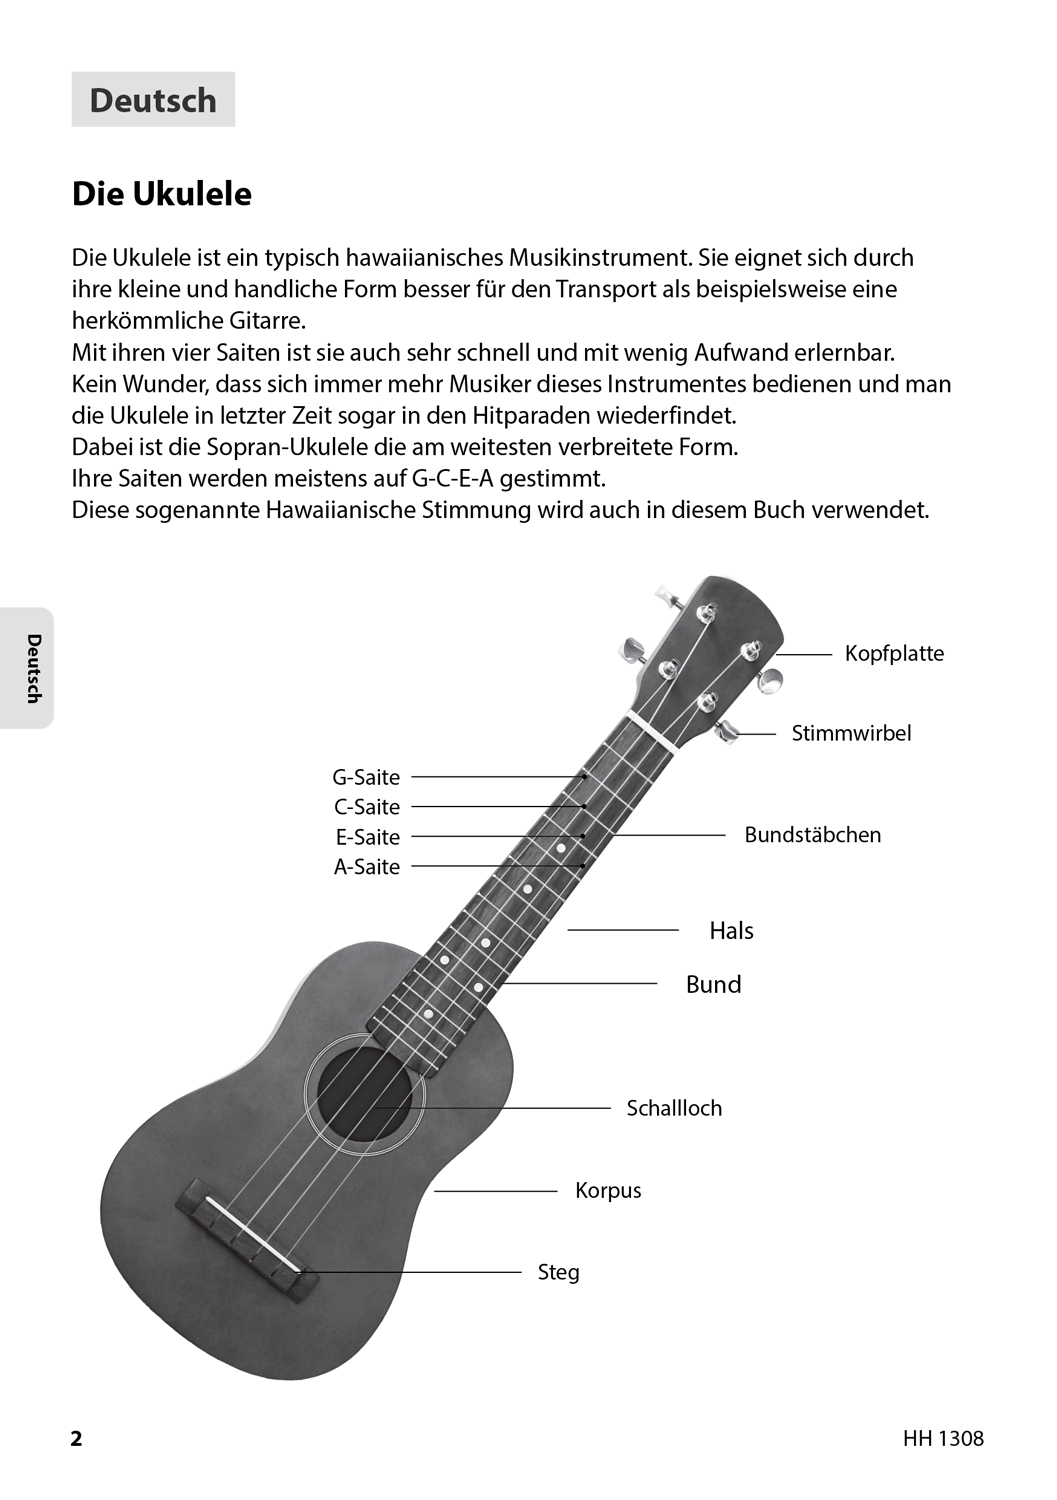 Ukulele - Learn to play quick and easy, 4 languages Product Photos 3